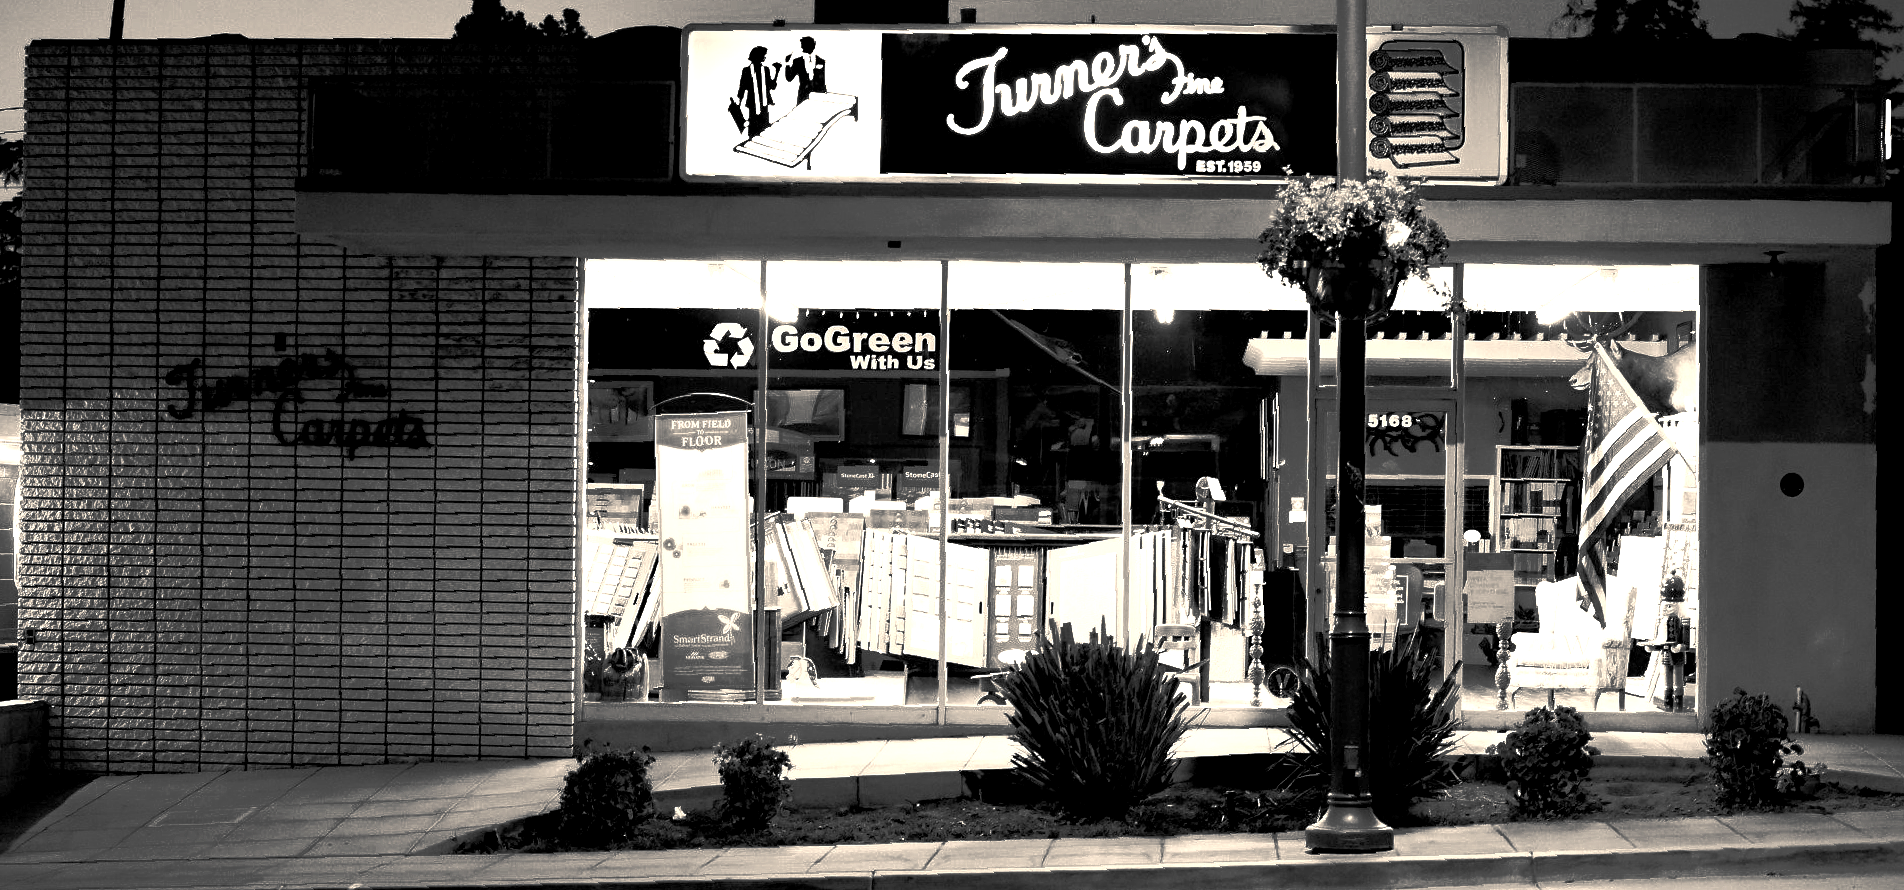 Turner's Carpets and Flooring  Yucaipa Since 1965 Black & White Photo of Carpet Store at night